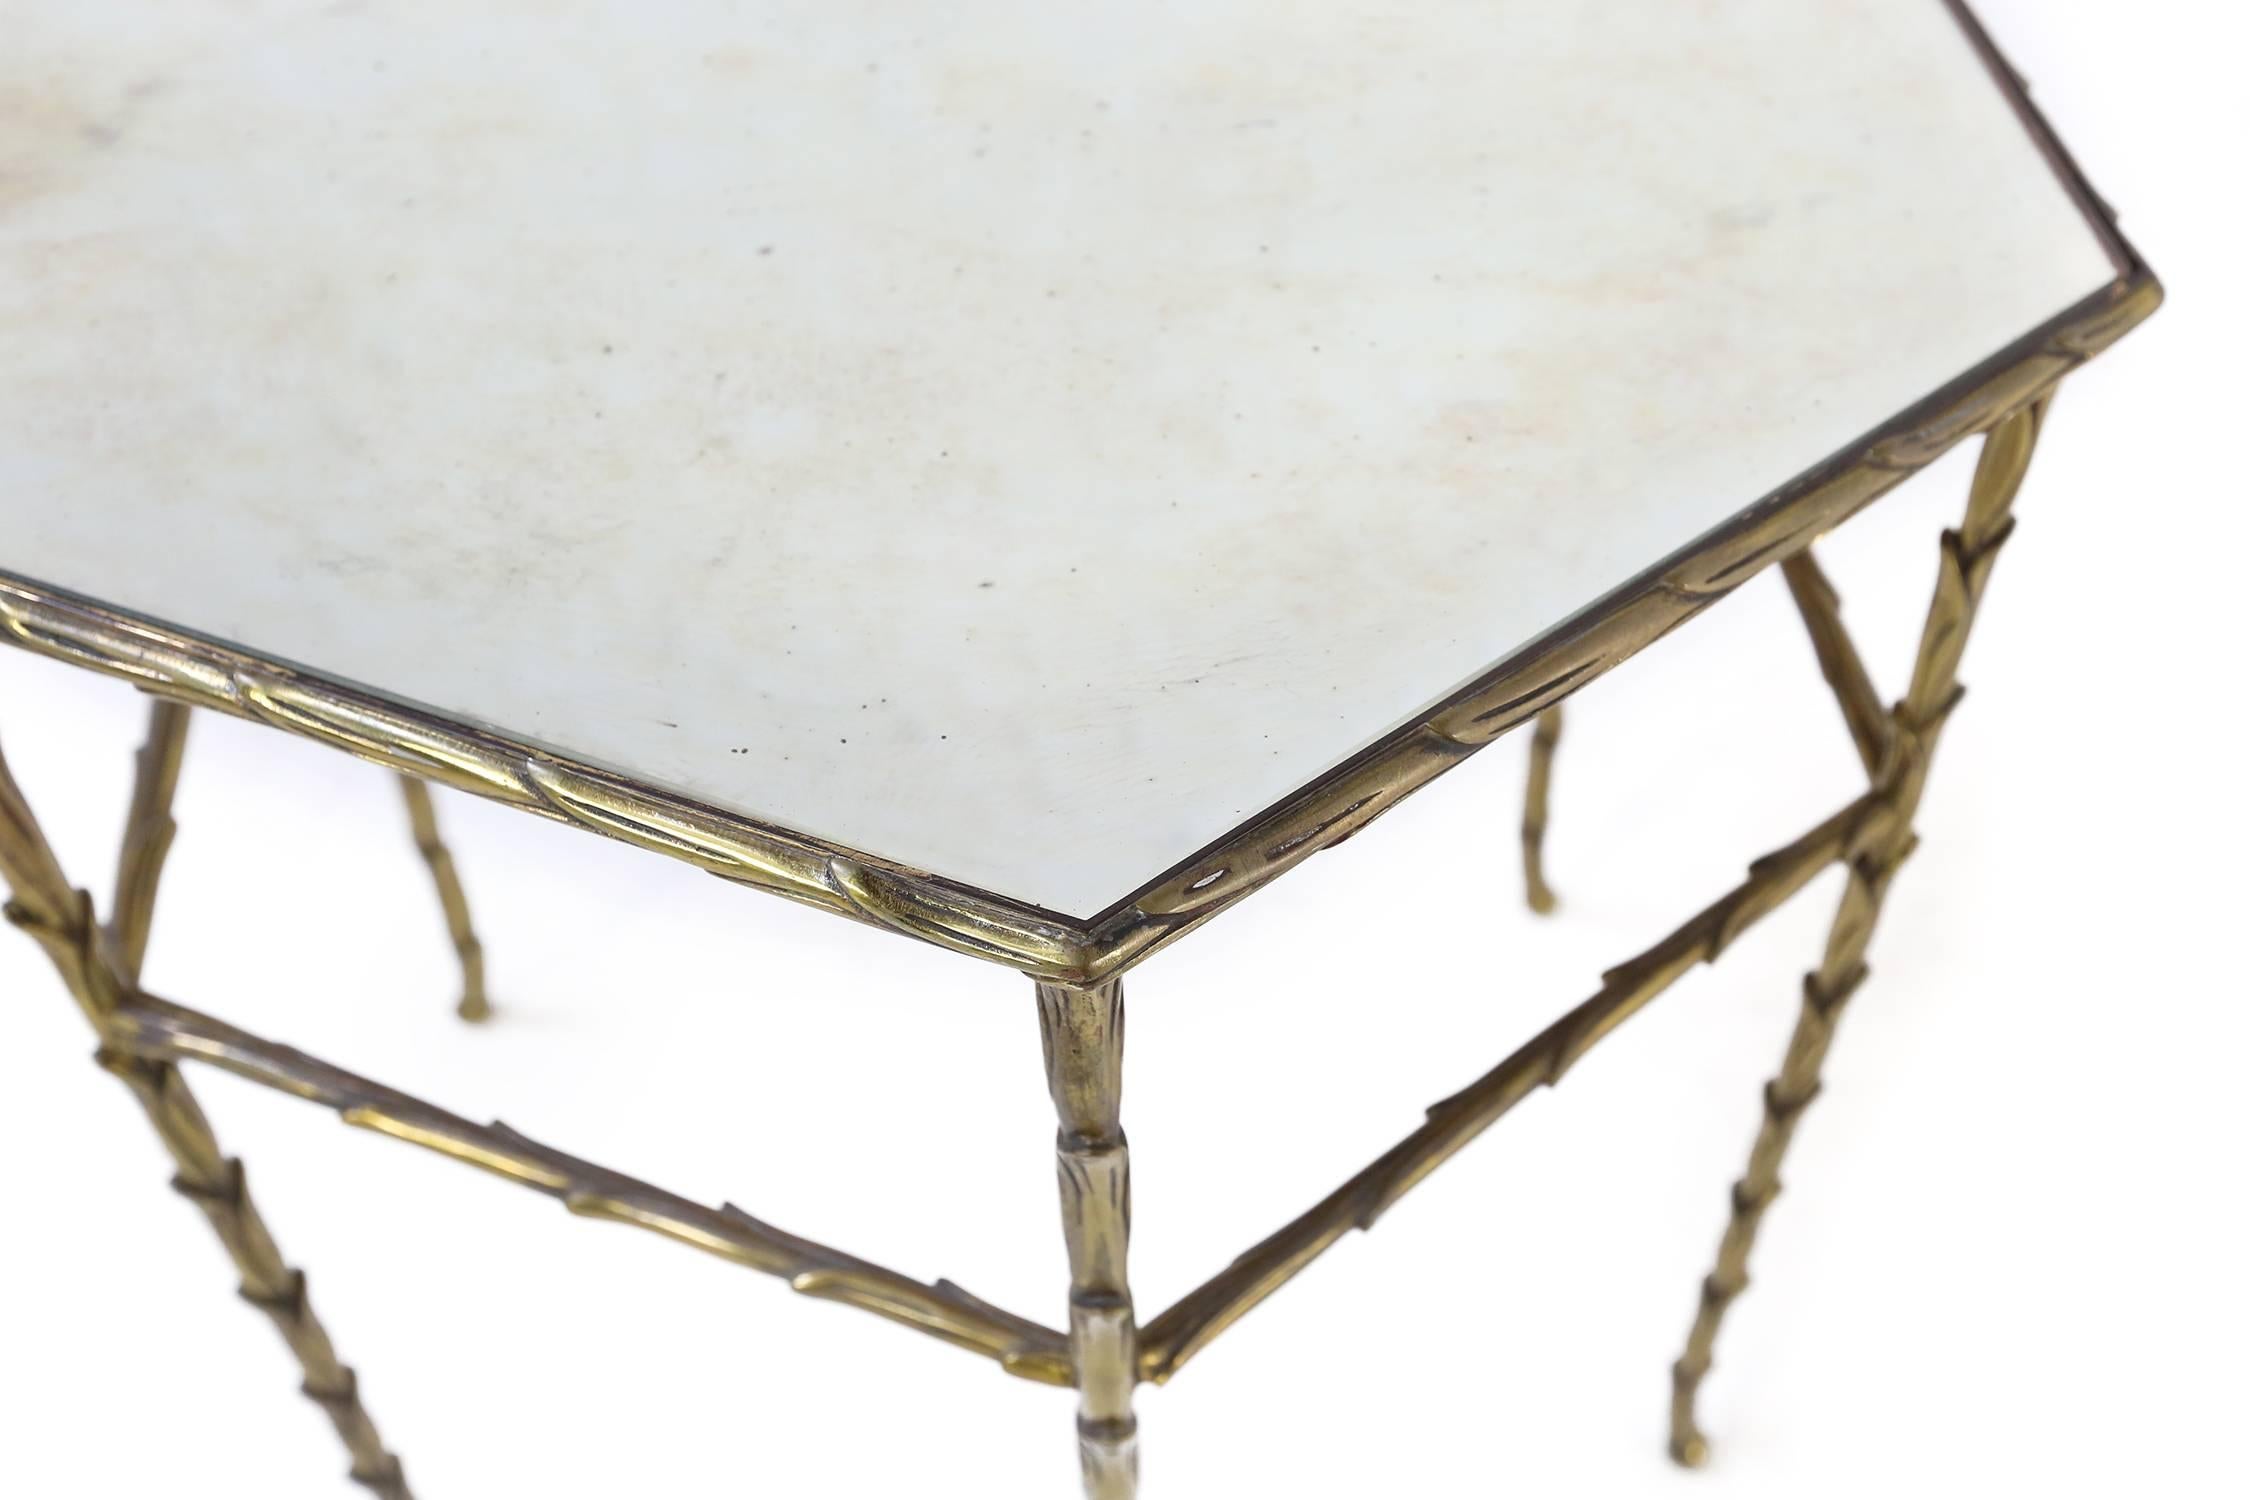 French Faux Bamboo Brass Hexagonal Table from Maison Bagues, 1950s For Sale 2